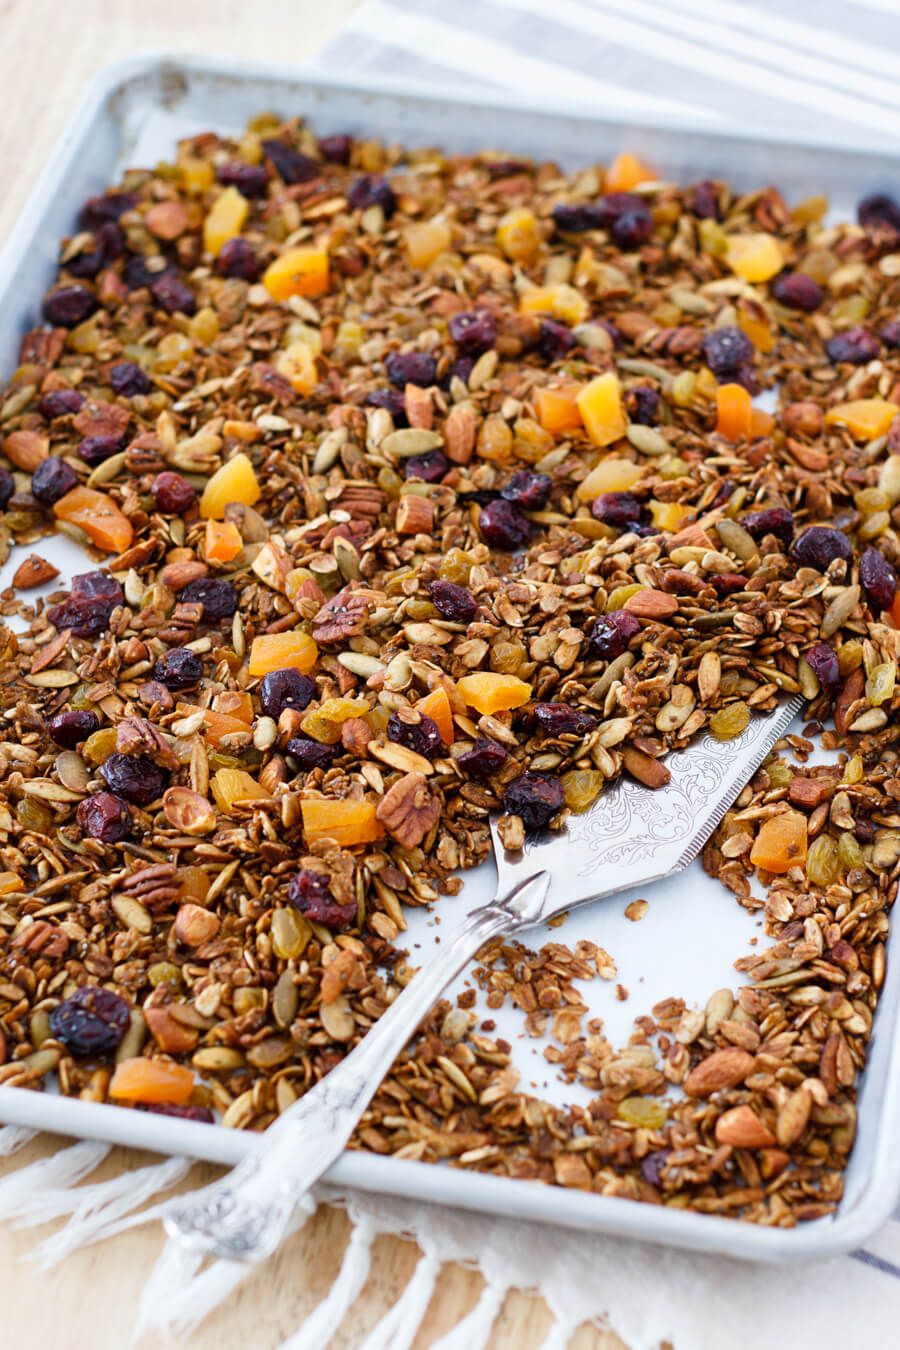 This Honey Harvest Granola is easy to make and packed full of healthy ingredients such as nuts, chia seeds, coconut oil, and molasses. Great on yogurt or as a crunchy snack. Recipe at www.designsofanykind.com